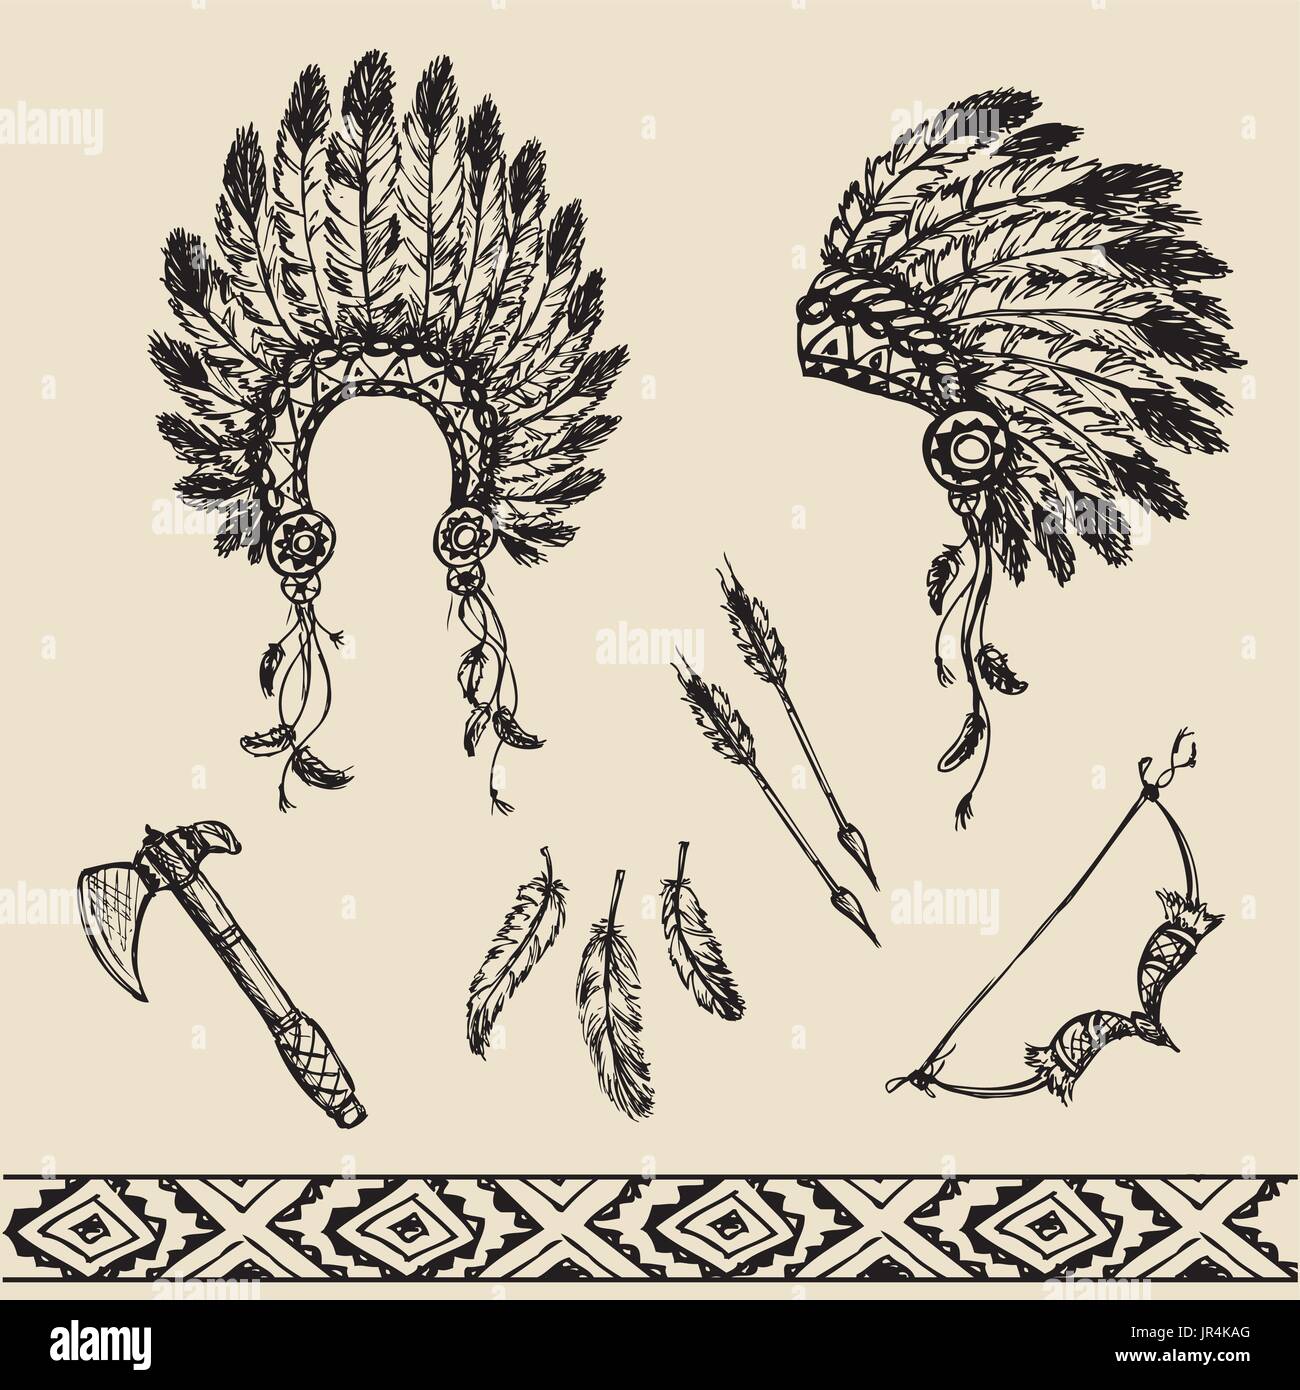 Collection of vintage hand drawn design elements: peace pipe, Indian hat, dreamcatcher, axe, feathers and stars. Vector illustration Stock Vector